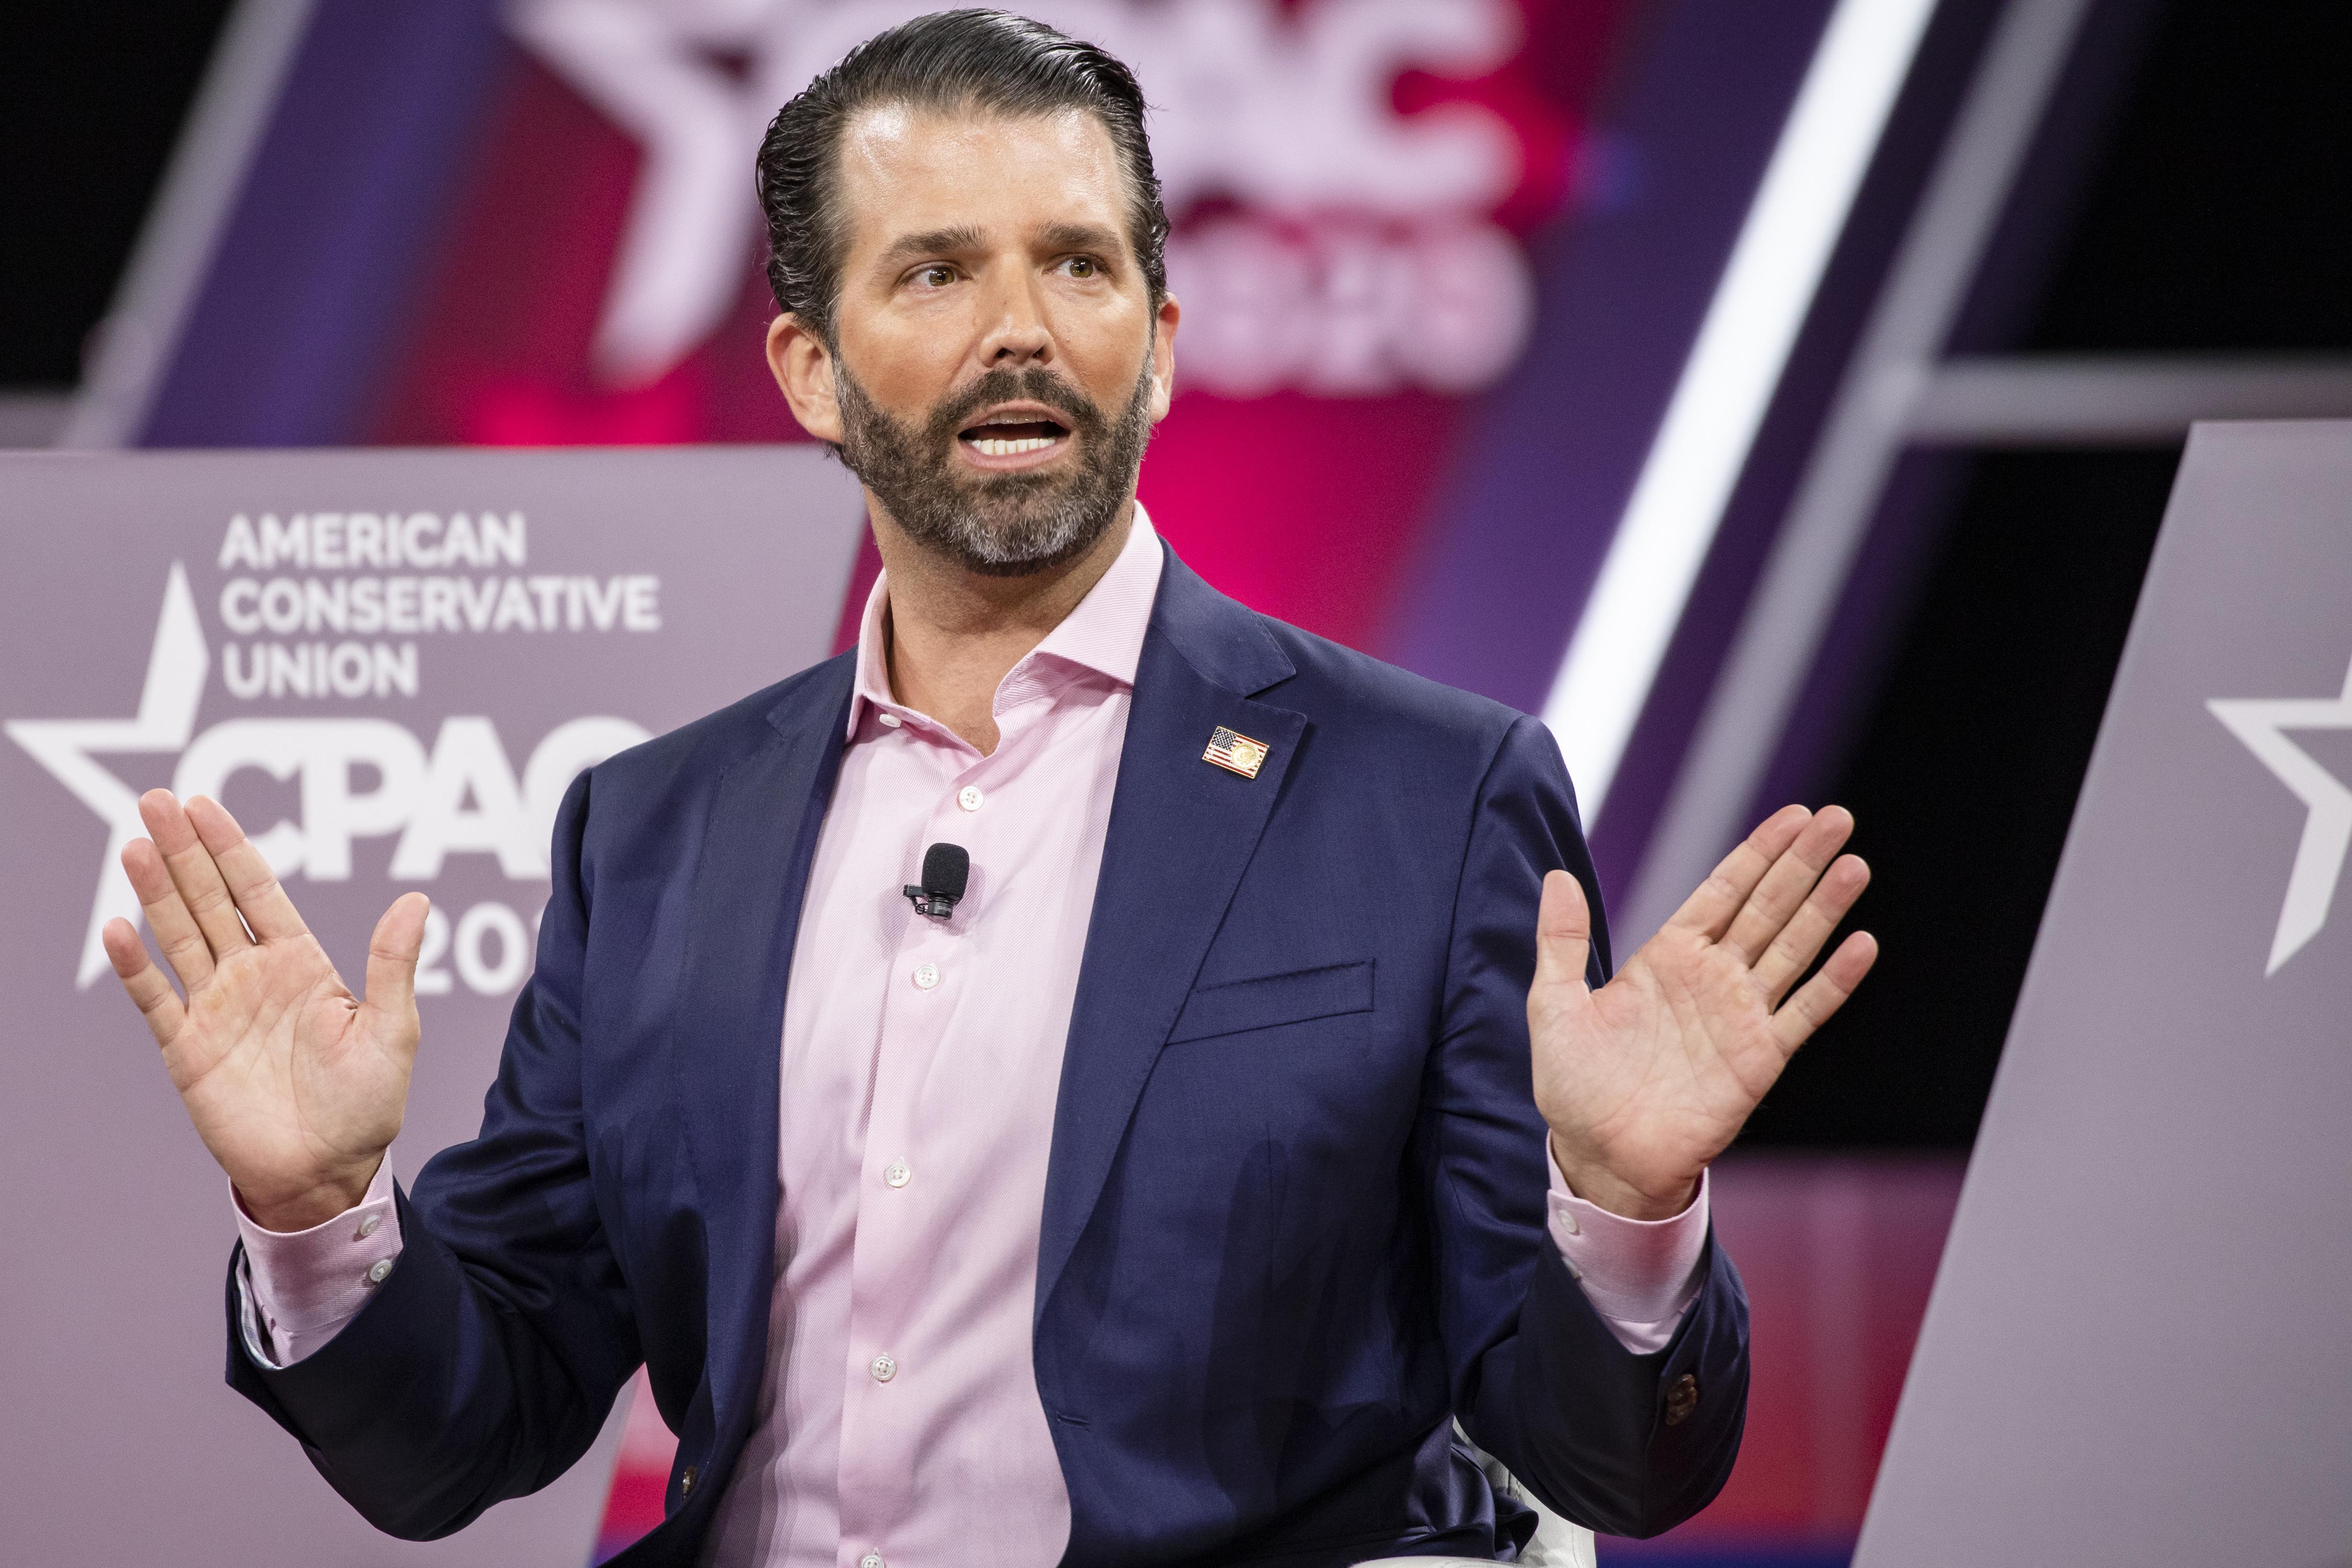 Donald Trump Jr. raises his hands while speaking, standing in front of a wall with a CPAC logo.